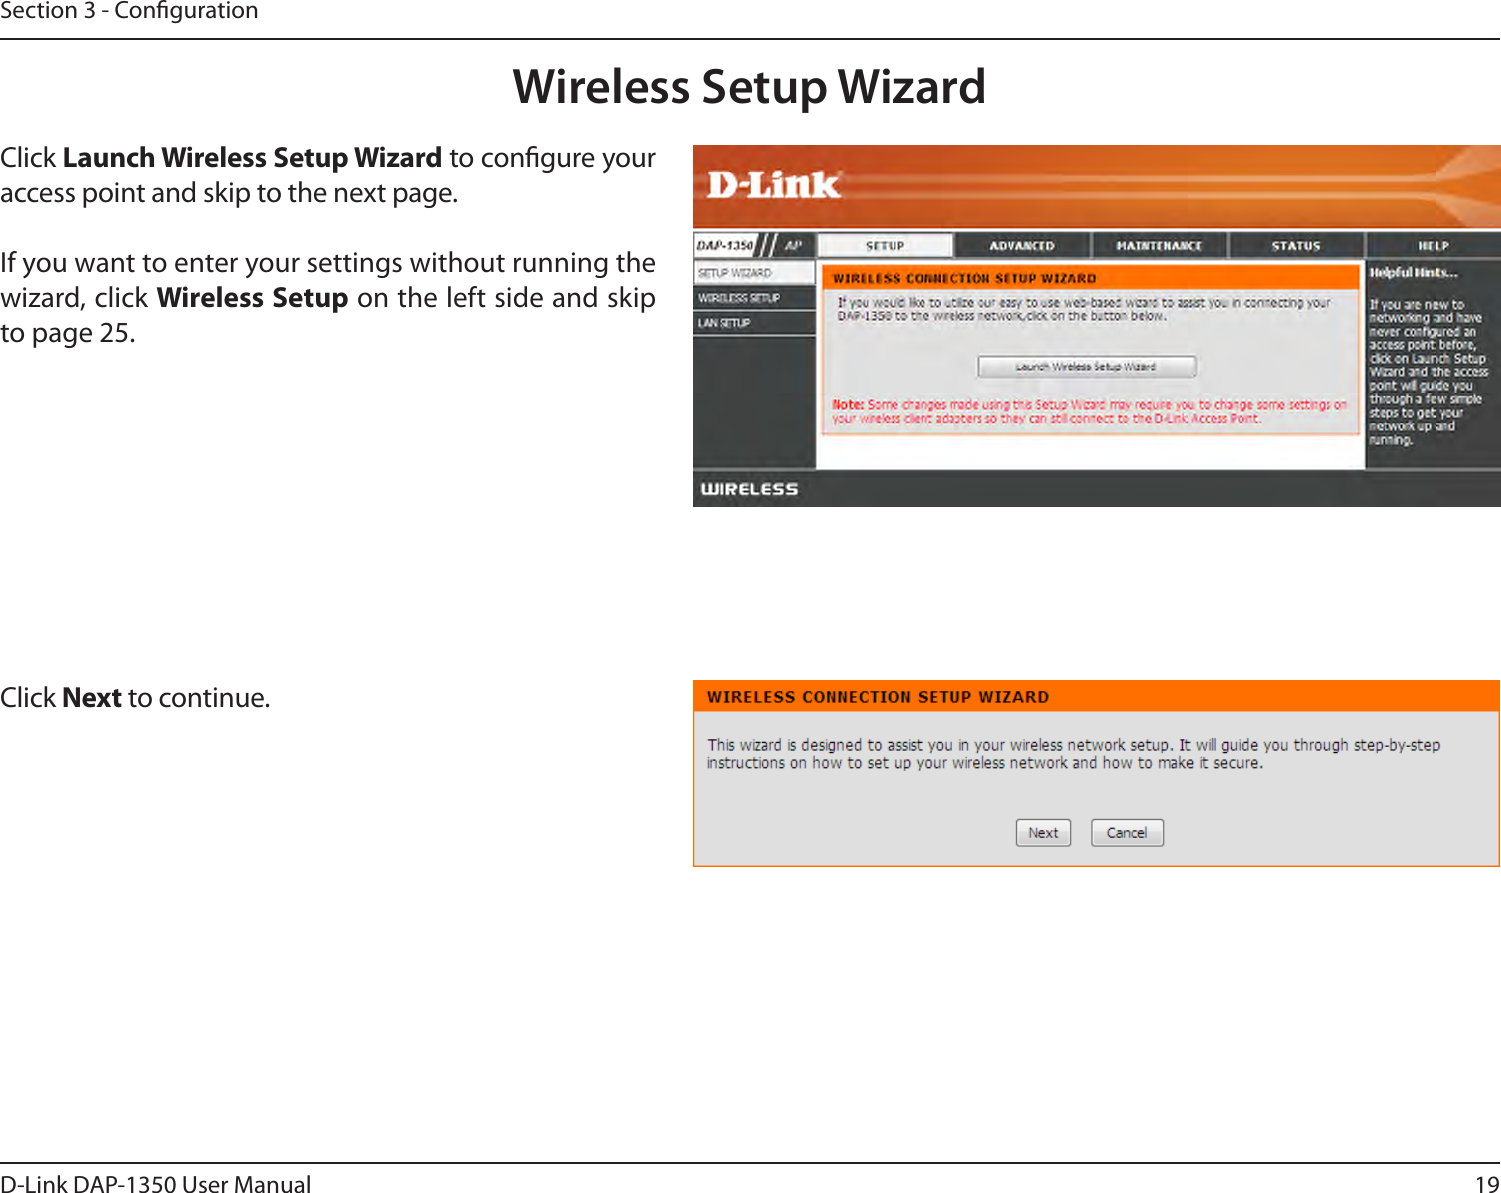 19D-Link DAP-1350 User ManualSection 3 - CongurationClick Launch Wireless Setup Wizard to congure your access point and skip to the next page.If you want to enter your settings without running the wizard, click Wireless Setup on the left side and skip to page 25.Wireless Setup WizardClick Next to continue.